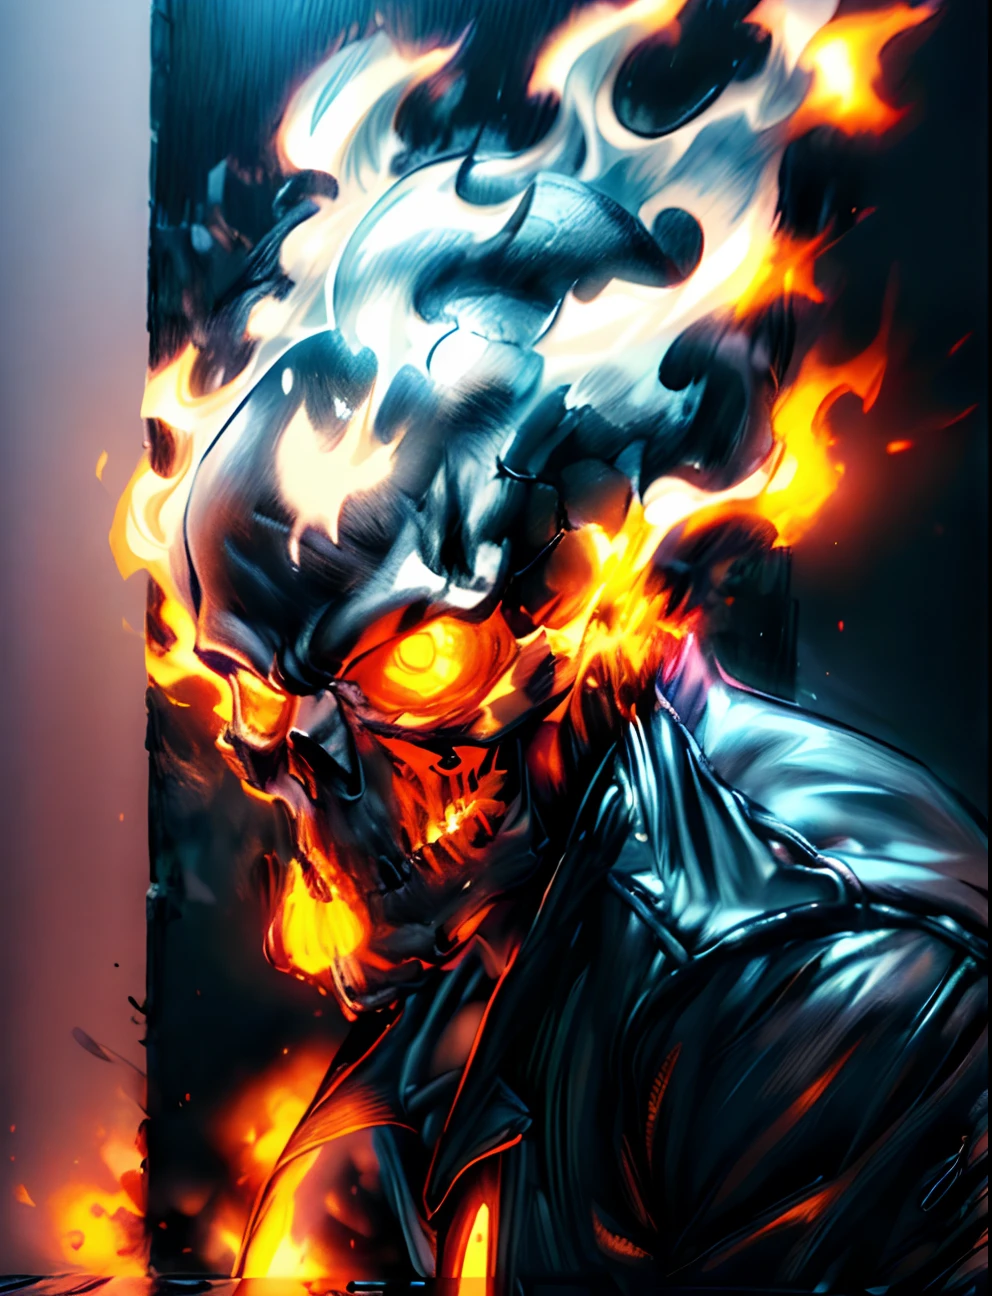 (RAW Photo, Best Quality), (Realistic, Photorealistic Photo: 1.3), Best Quality, Highly Detailed, Masterpiece, Ultra Detailed, Illustration, ghost rider, burning skull, black jacket, black jeans, black shoes, epic background, standing like ghost rider, upper body, ghost riders costume, Best Quality, Extremely Detailed CG Unified 8k Wallpaper, Ink, Amazing, badass look, portrait, close up (skull texture), intricately detailed, fine details, hyperdetailed.